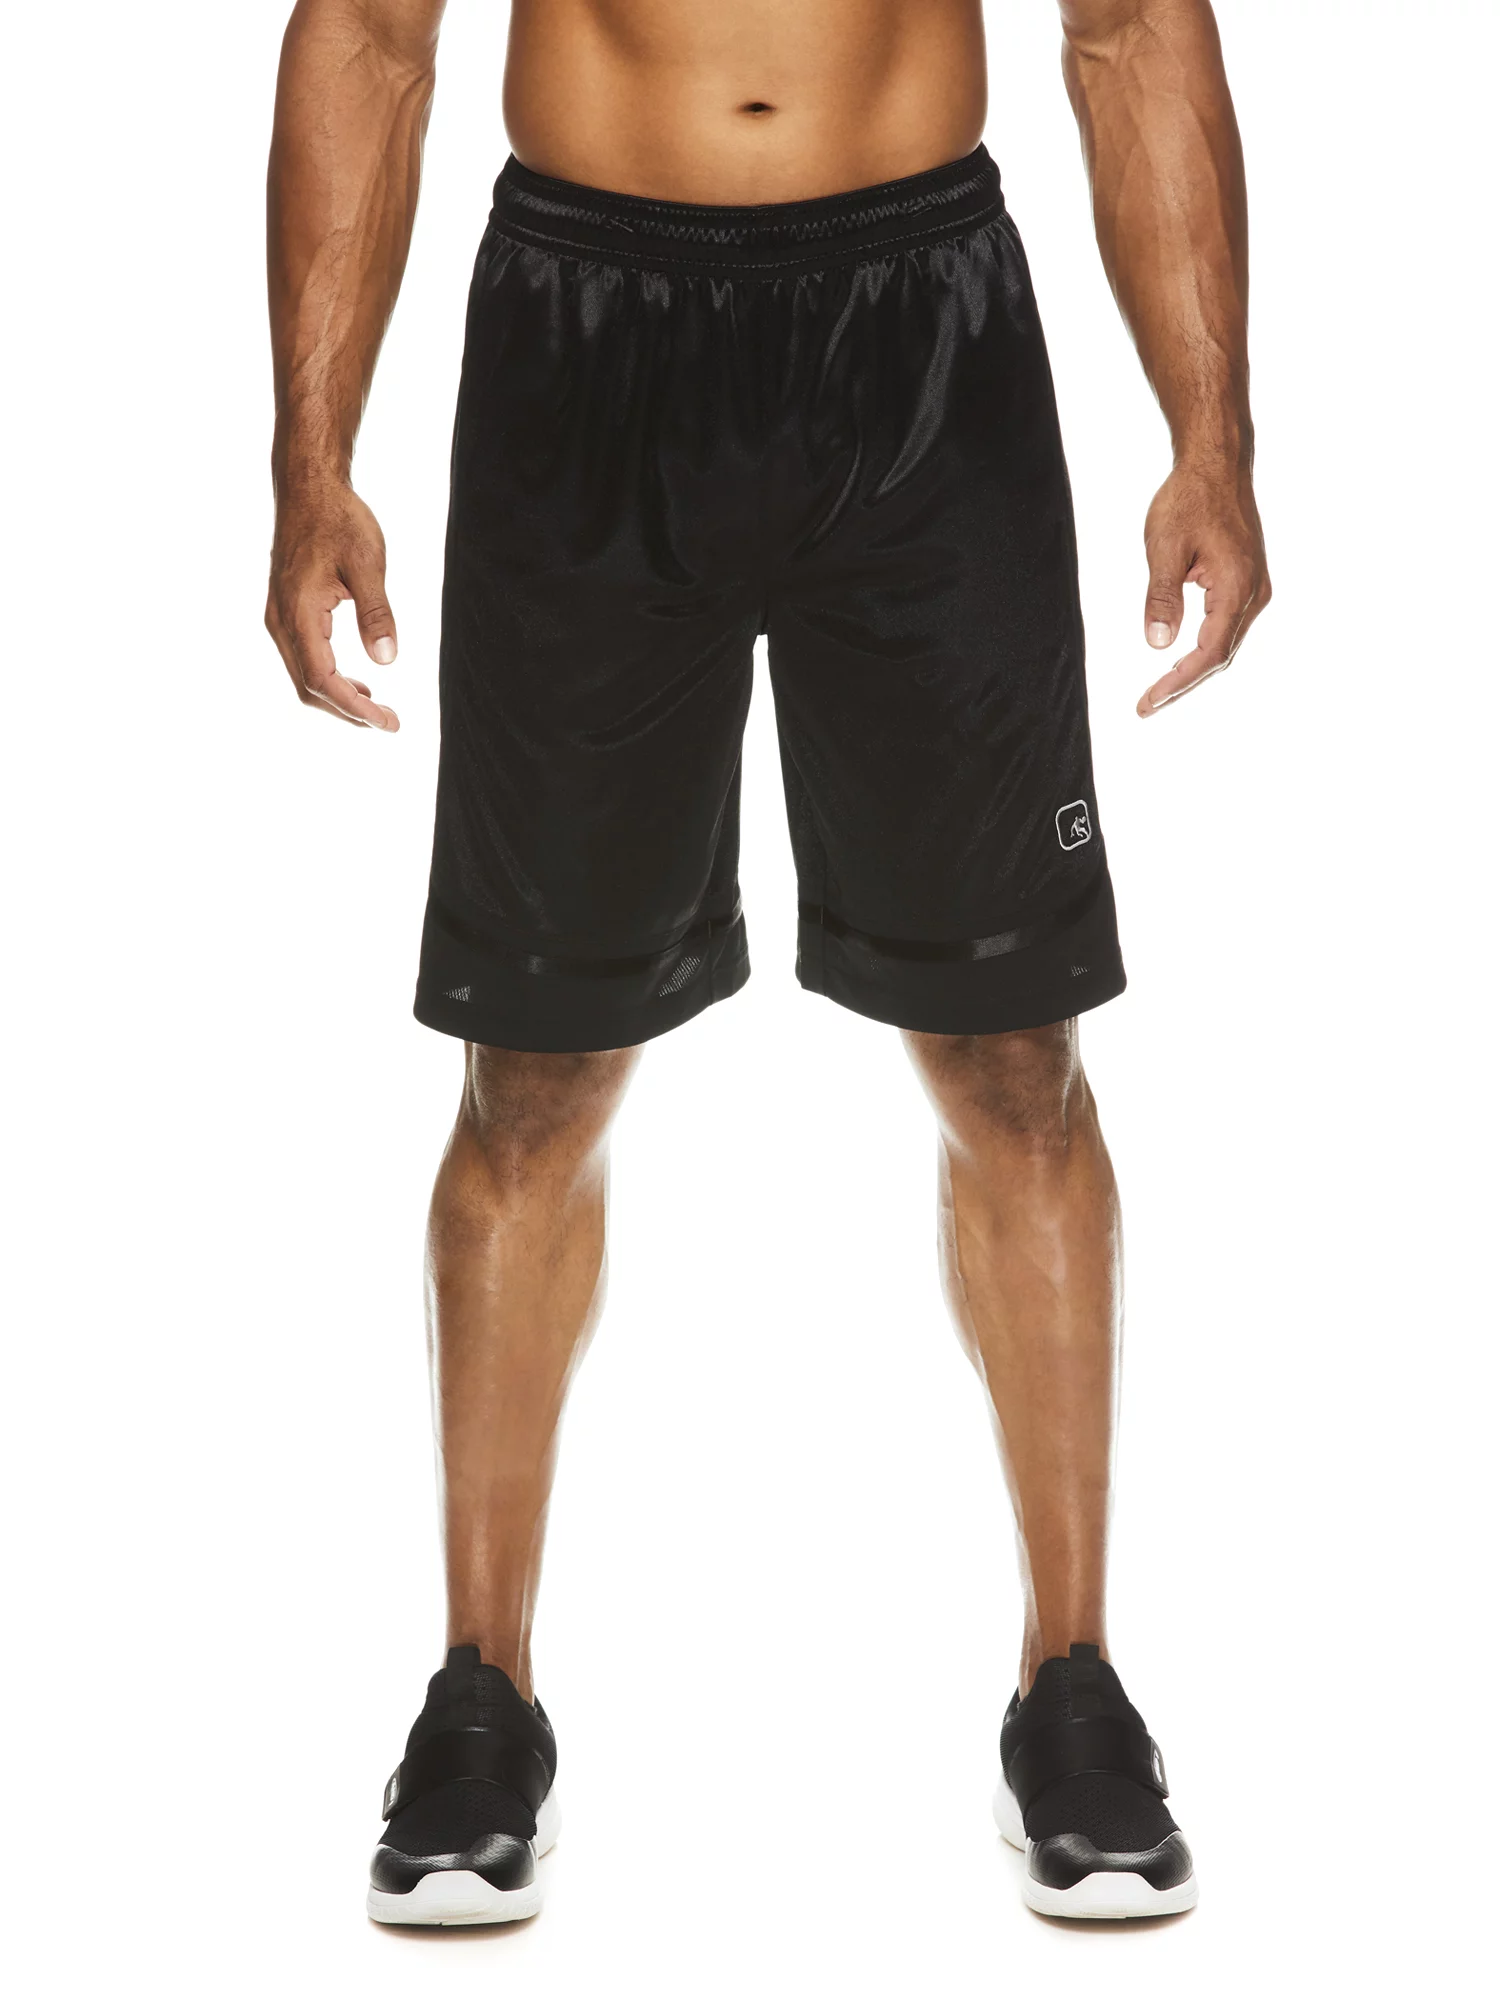 AND1 Men's and Big Men's Active Core 11" Home Court Basketball Shorts